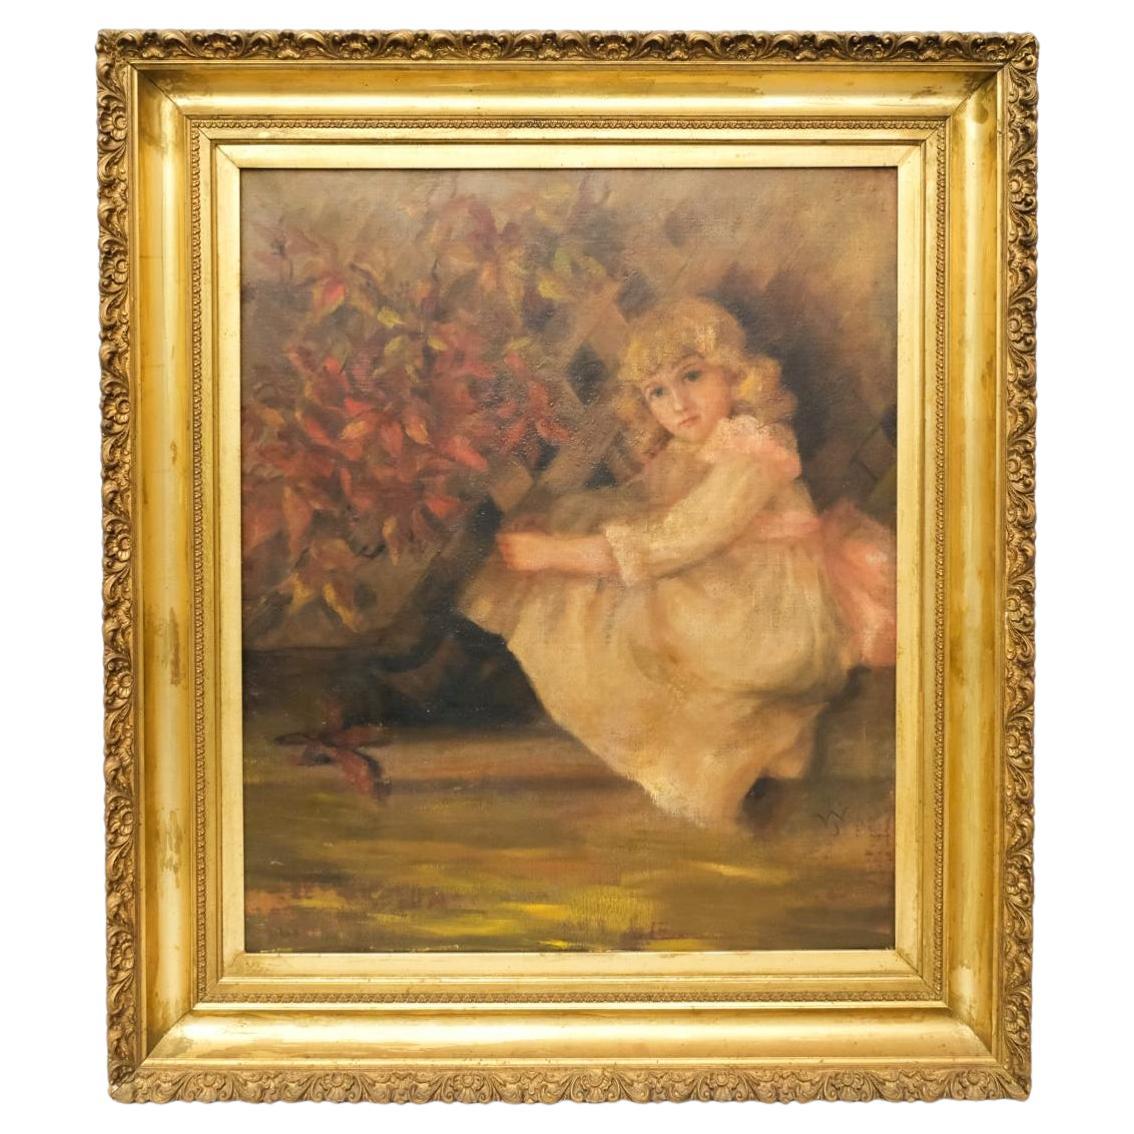 Mid 19th Century American School Portrait of a Girl Oil on Canvas in Gilt Frame